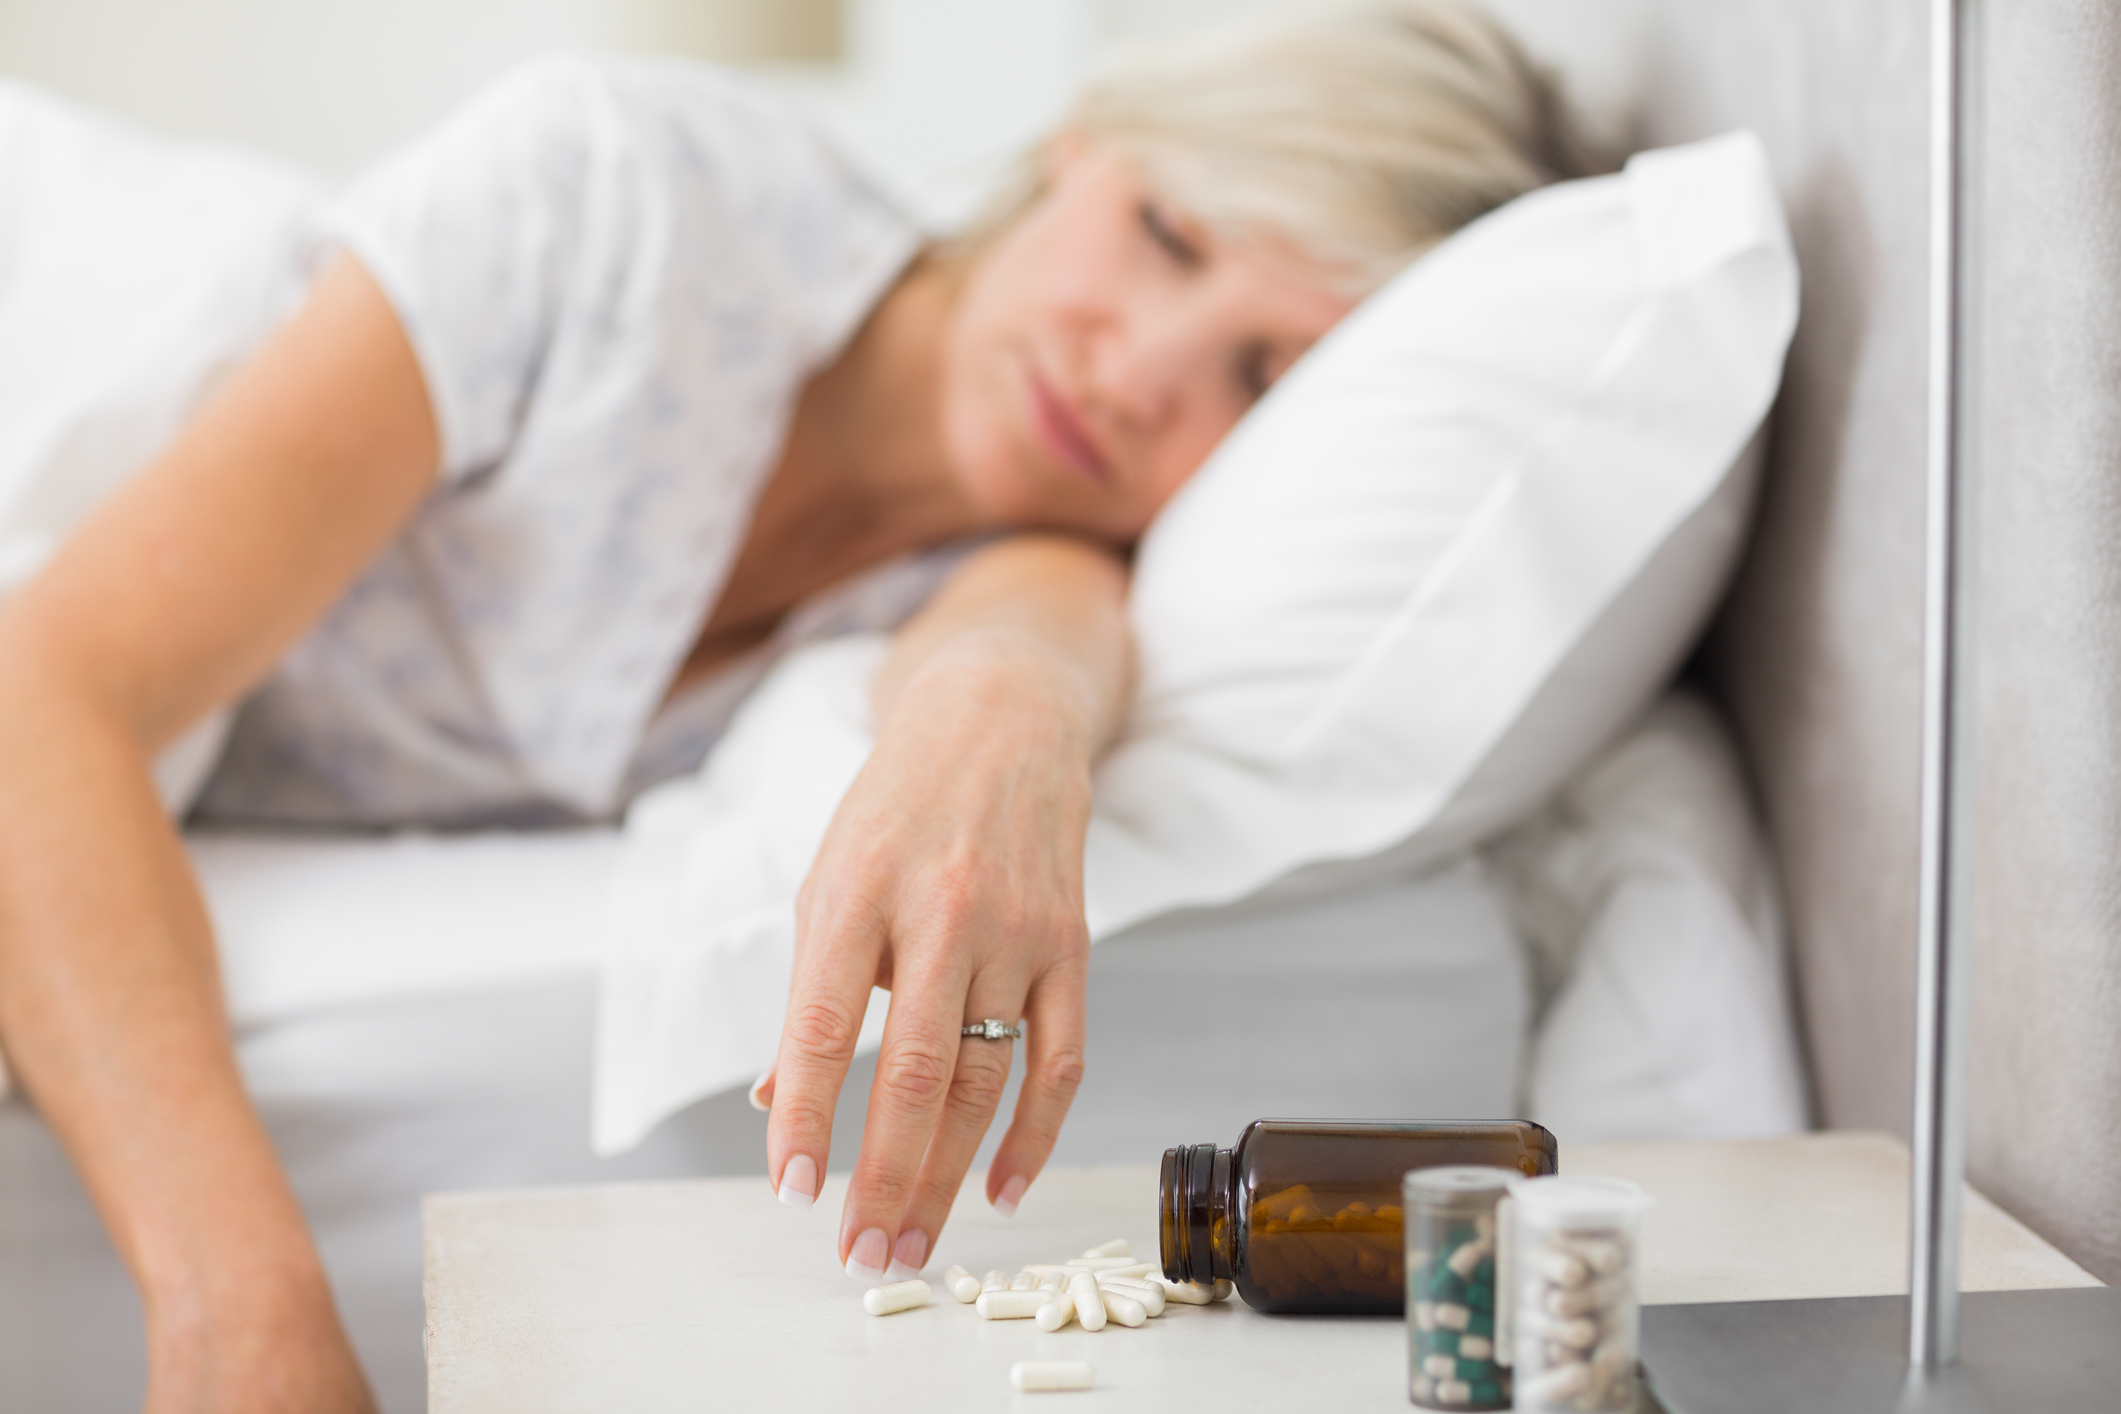 Over 65? Think twice about taking sleeping pills